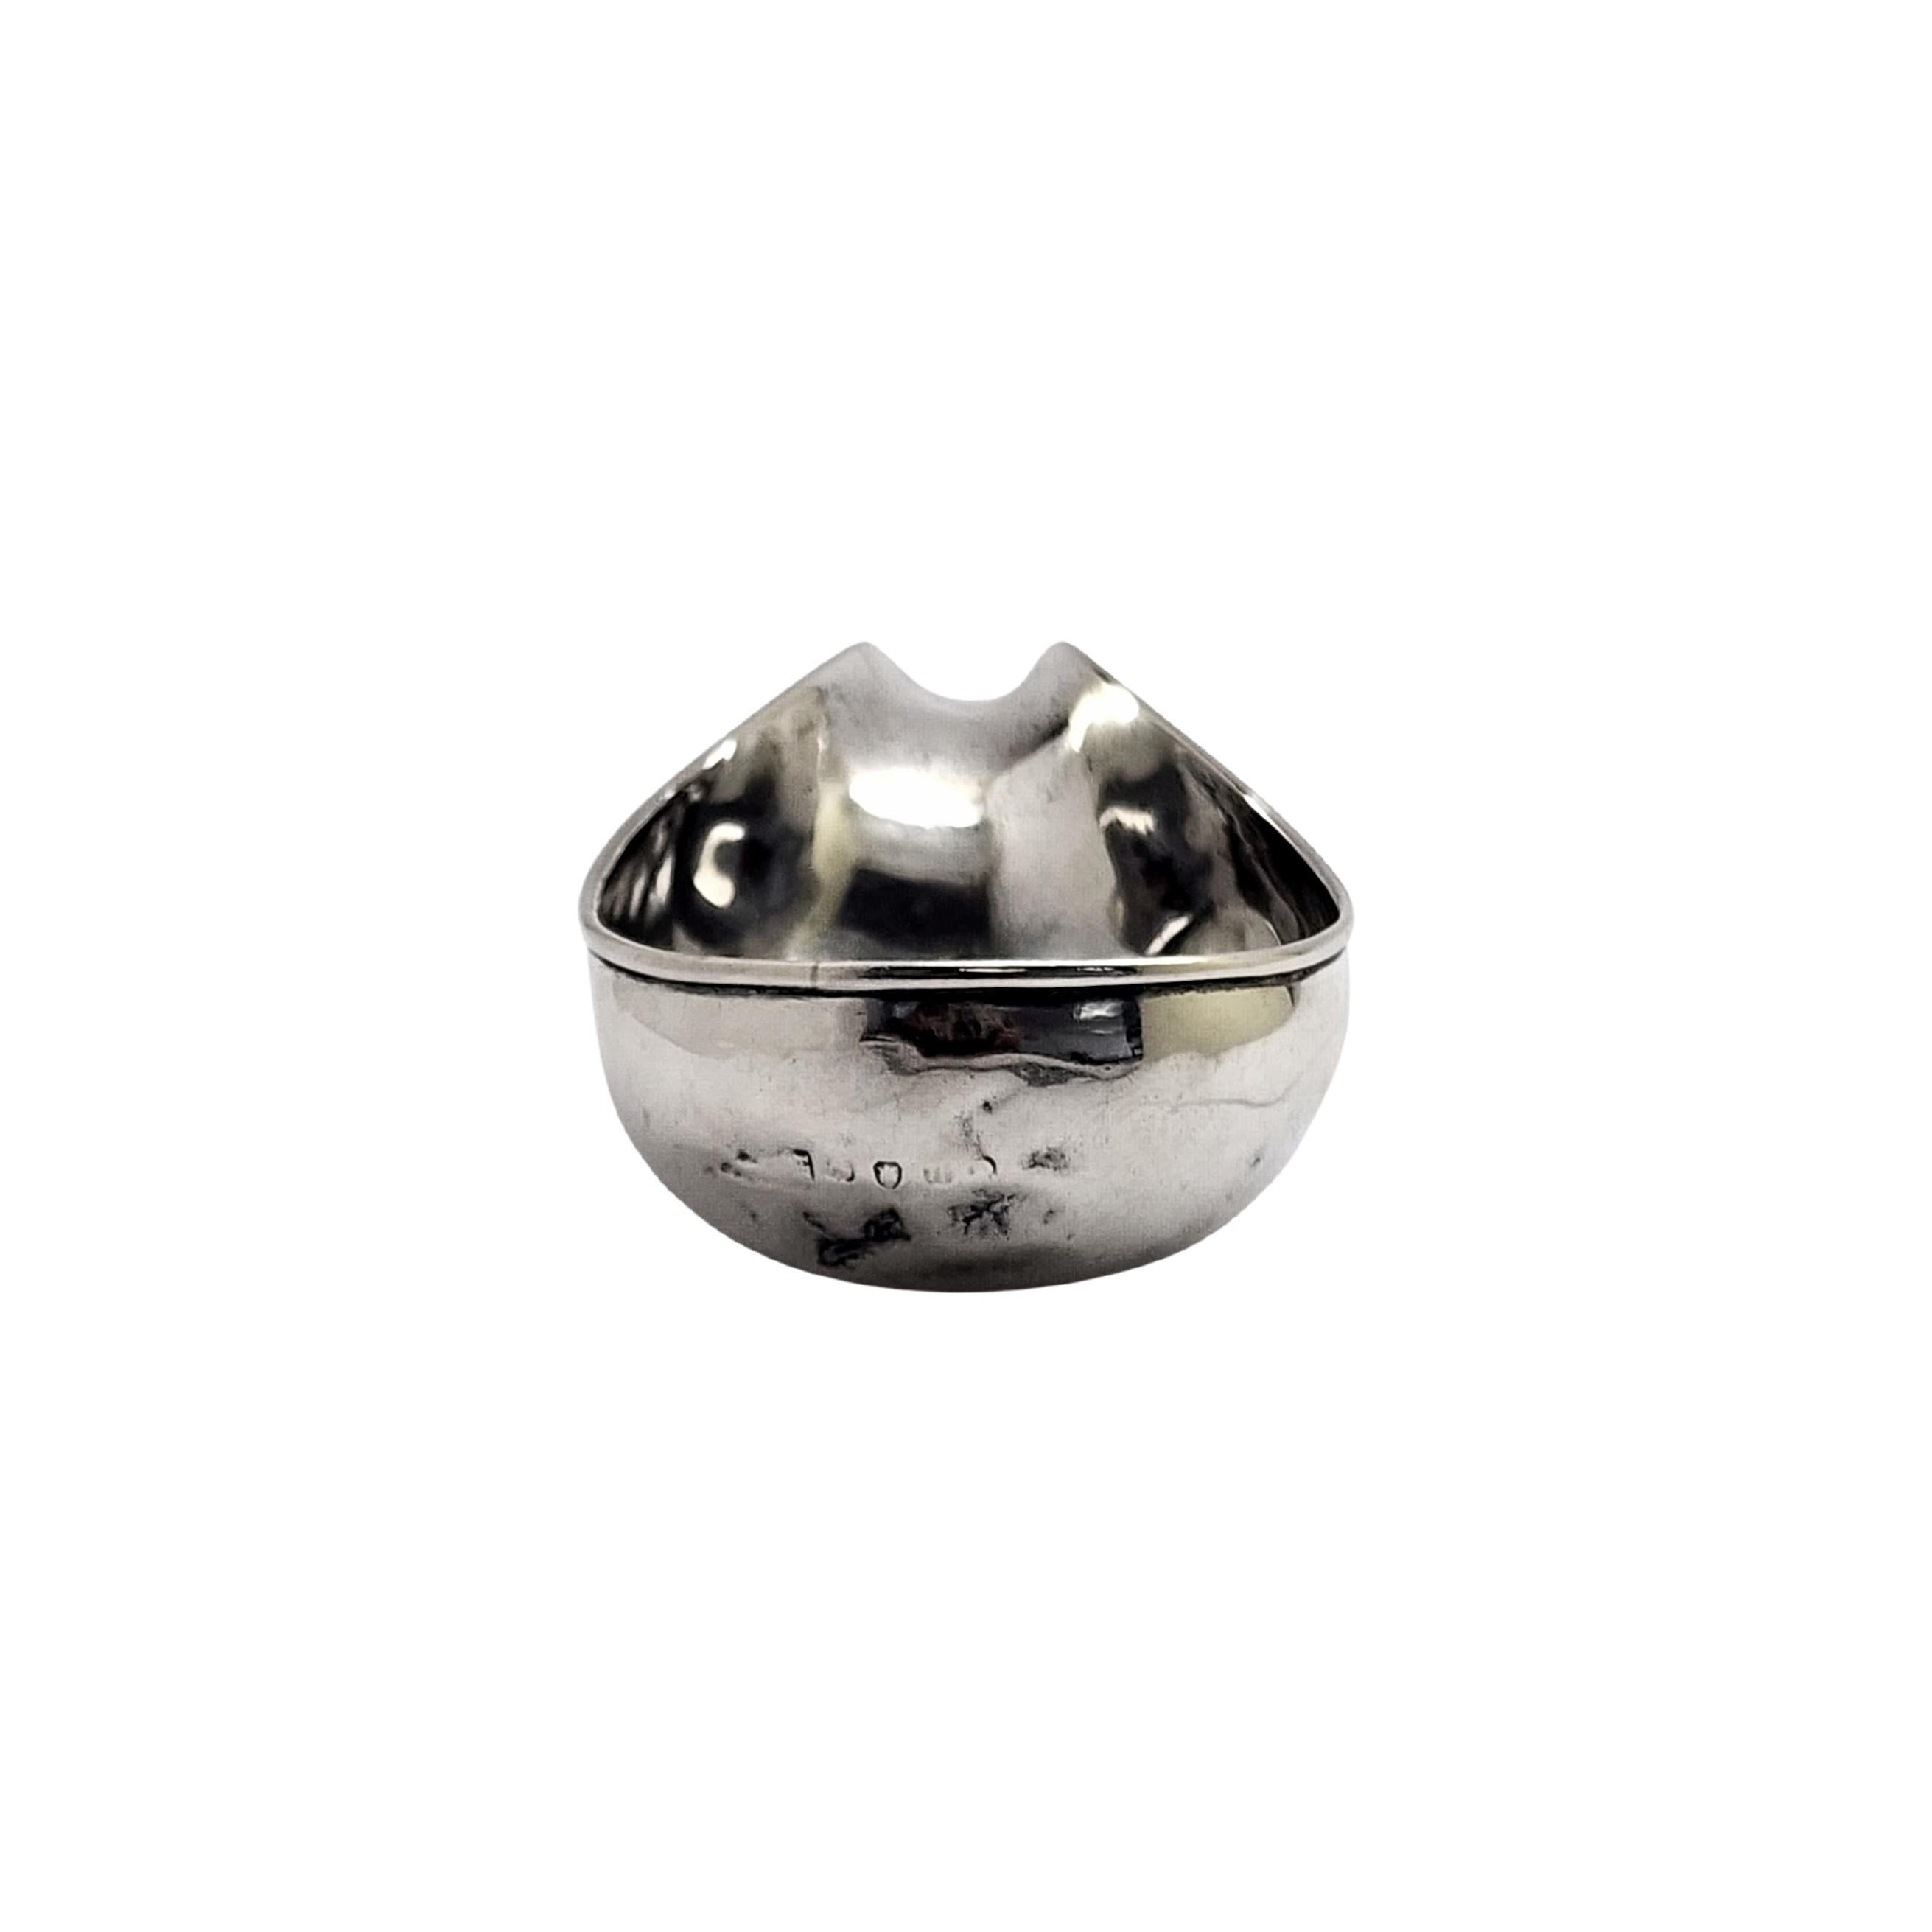 Women's or Men's Antique English Sterling Silver Pap Boat For Sale